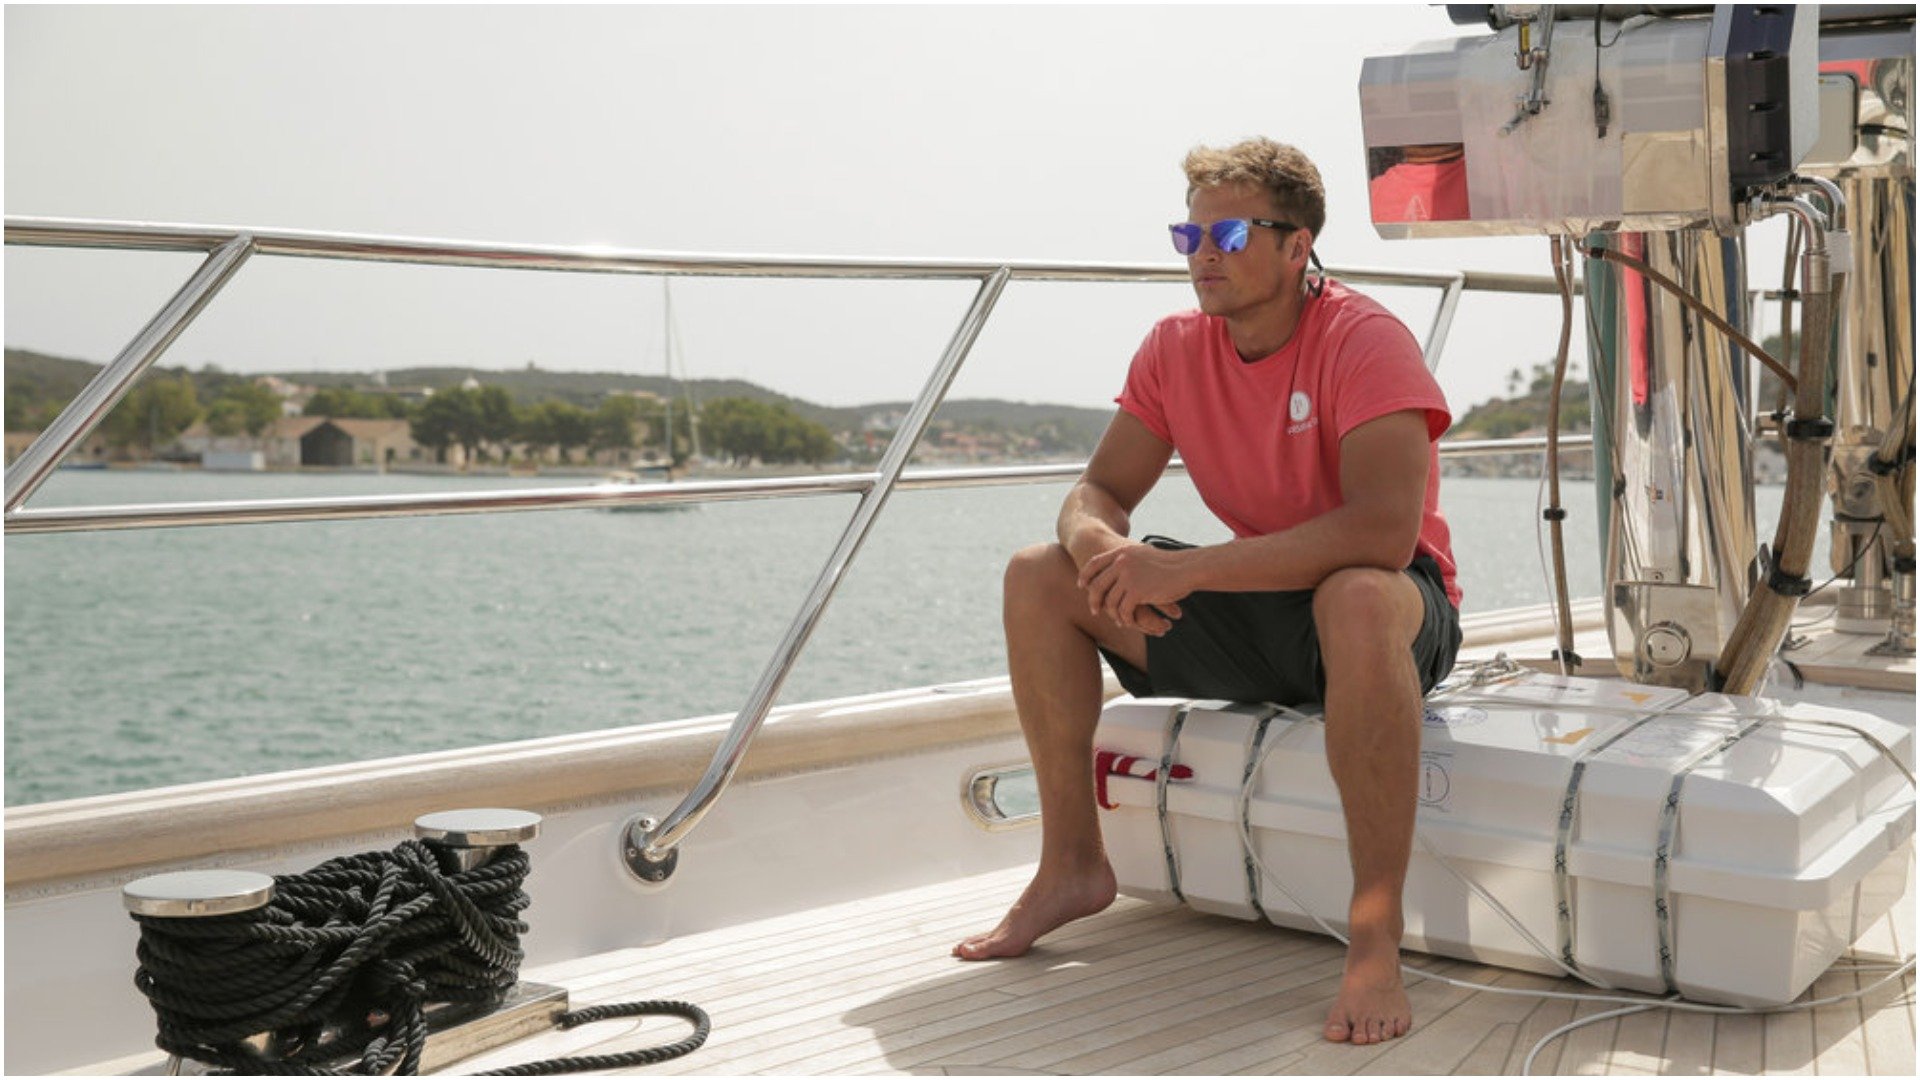 Deckhand Tom Pearson from 'Below Deck Sailing Yacht' takes a break on deck